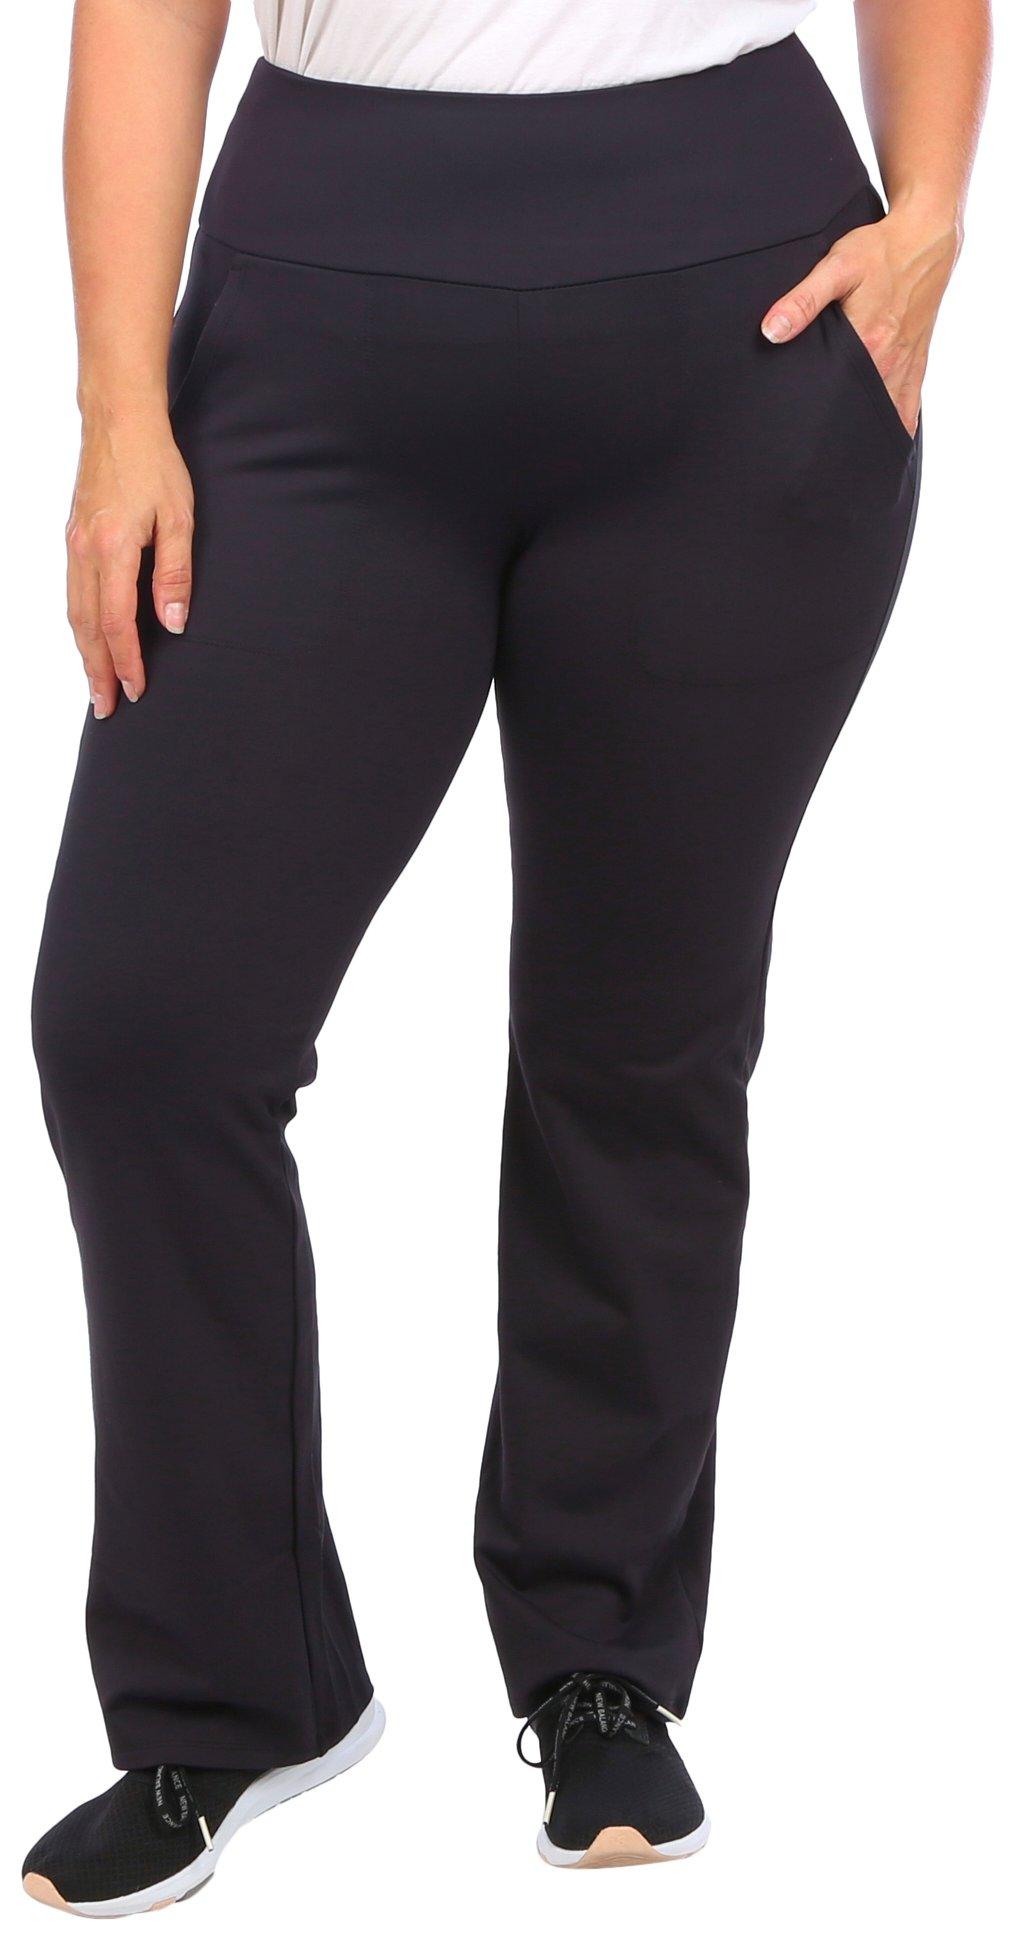 Athleta NAVY BLUE STUDIO FLARE PANTS Size undefined - $36 - From